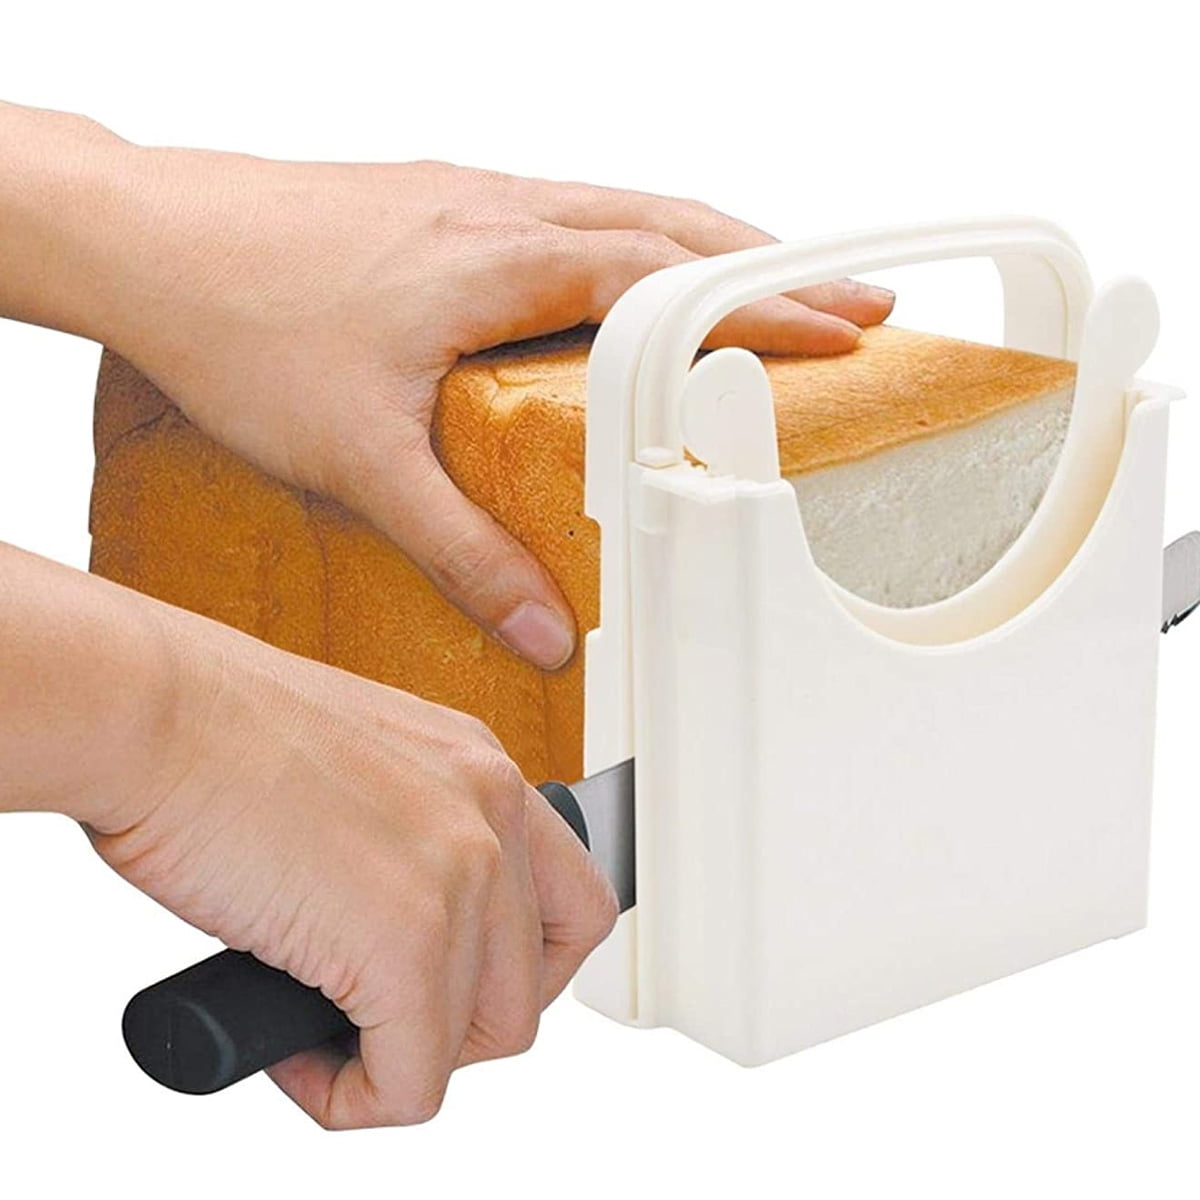 Folding Bread Slicer  Collapsible, Easy to Use Cutting Guide w